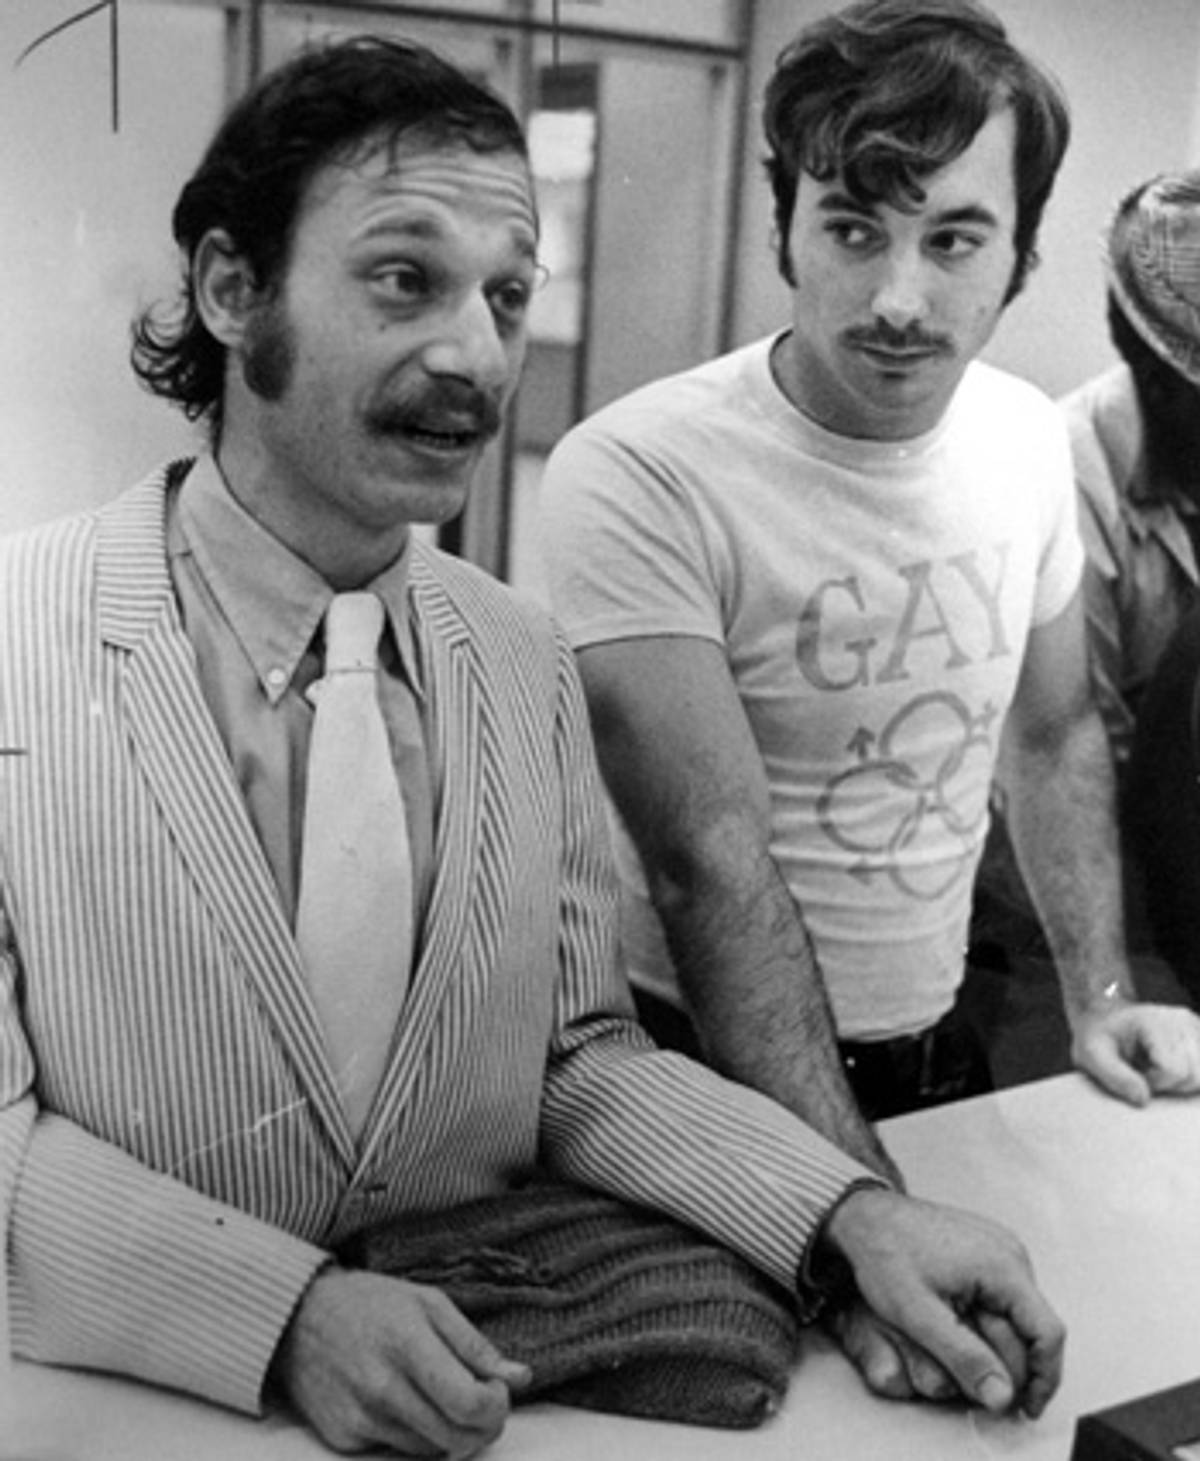 Faygele ben Miriam (left), then known as John Singer, applies for a marriage license with Paul Barwick at the King County Administration Building in Seattle in 1971